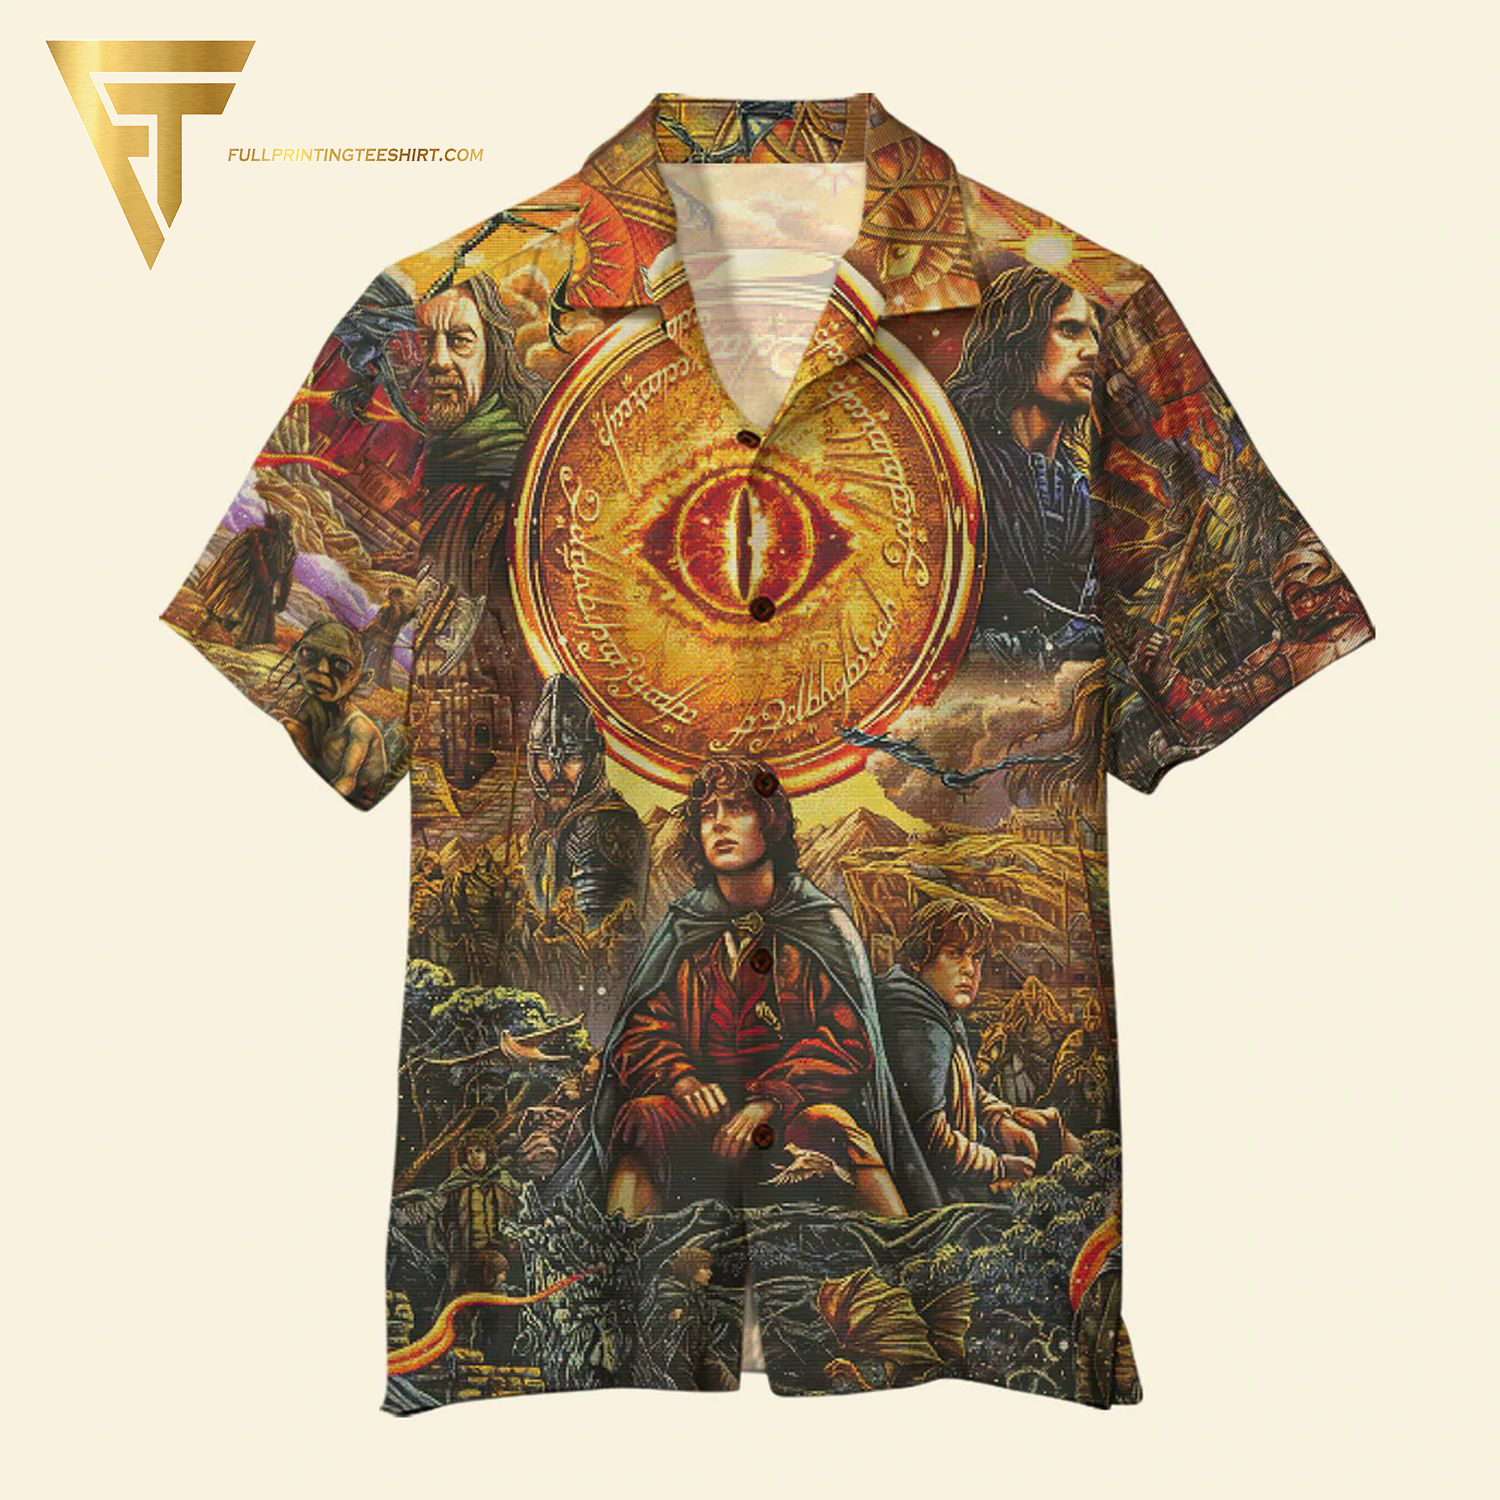 Fantastical Fusions: Exploring the World of Lord of the Rings in Wes Anderson's Vision and the Iconic Lord of the Rings Hawaiian Shirt